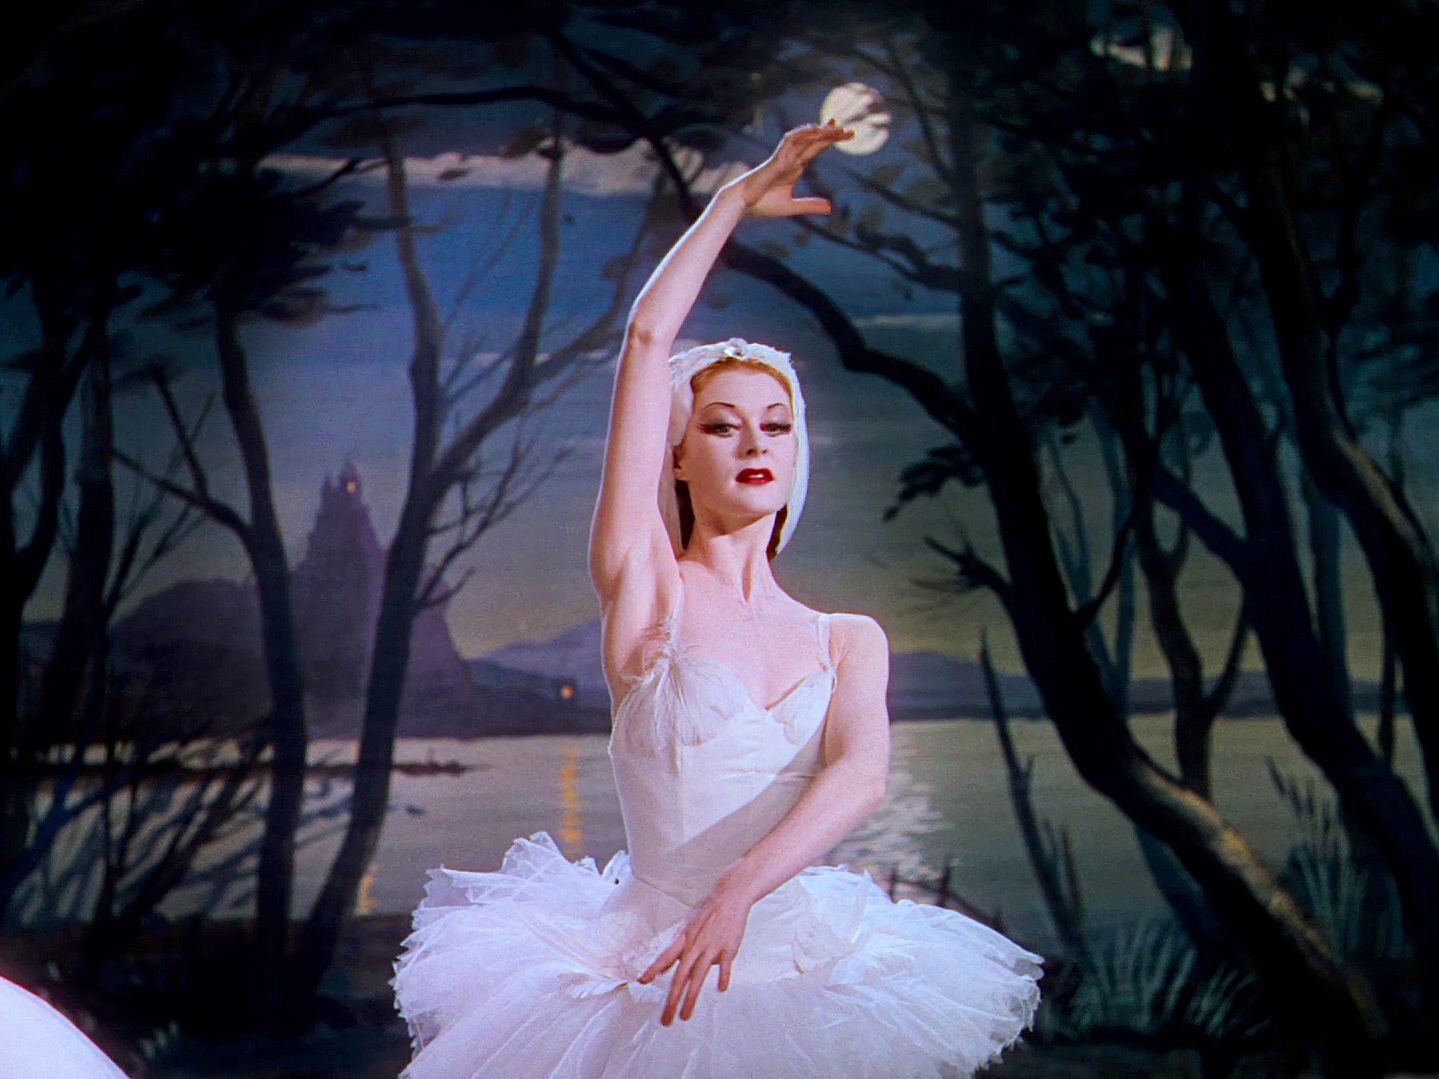 Victoria Page (Moira Shearer) dances in the Powell and Pressburger film, The Red Shoes from 1948